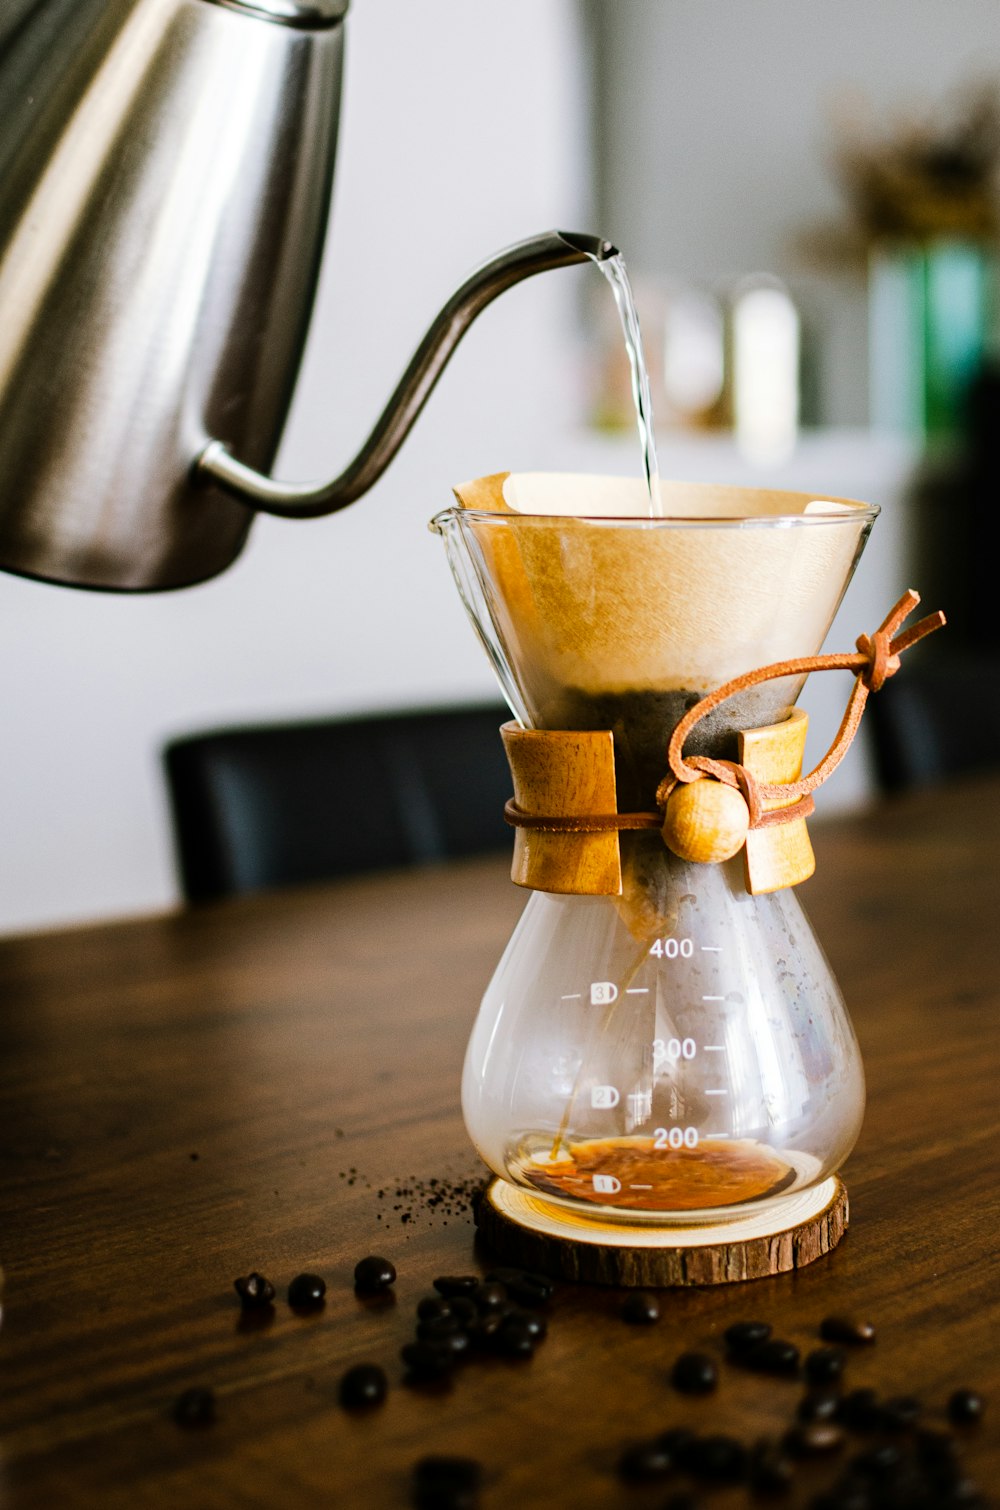 a coffee pot pouring coffee into a cup